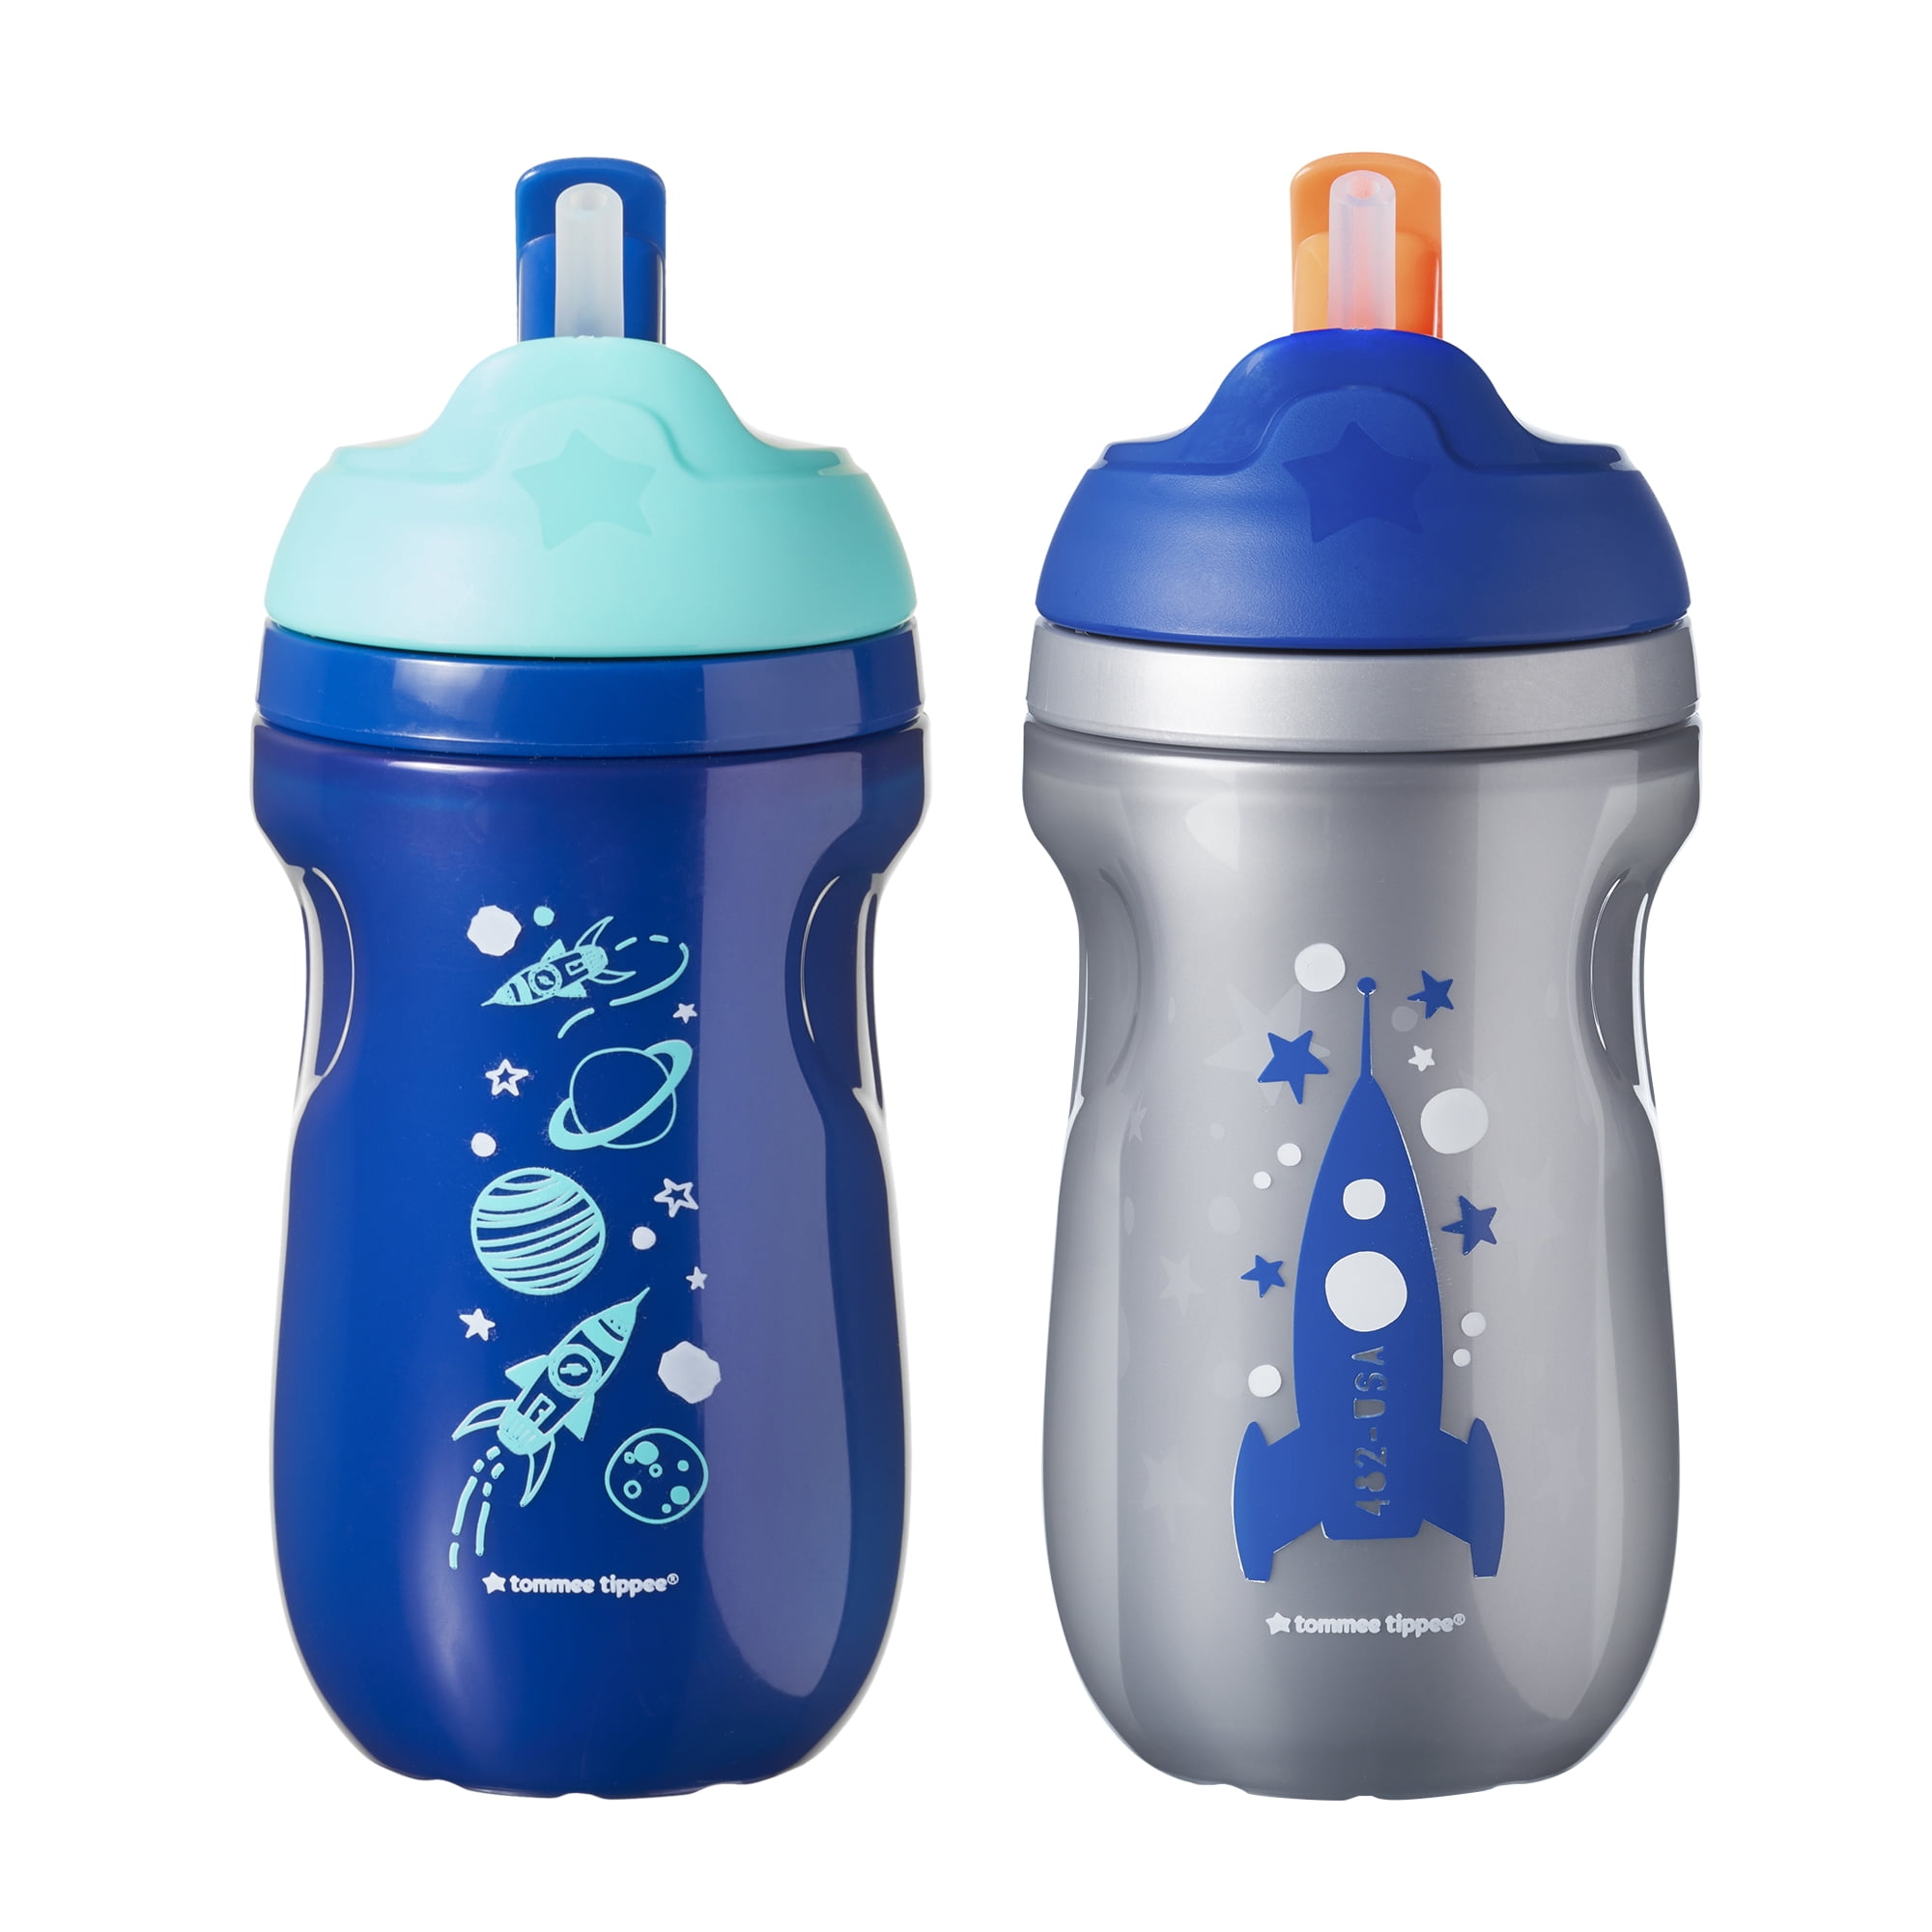 NEW Tommee Tippee Insulated Straw Cup, 9oz – Me 'n Mommy To Be